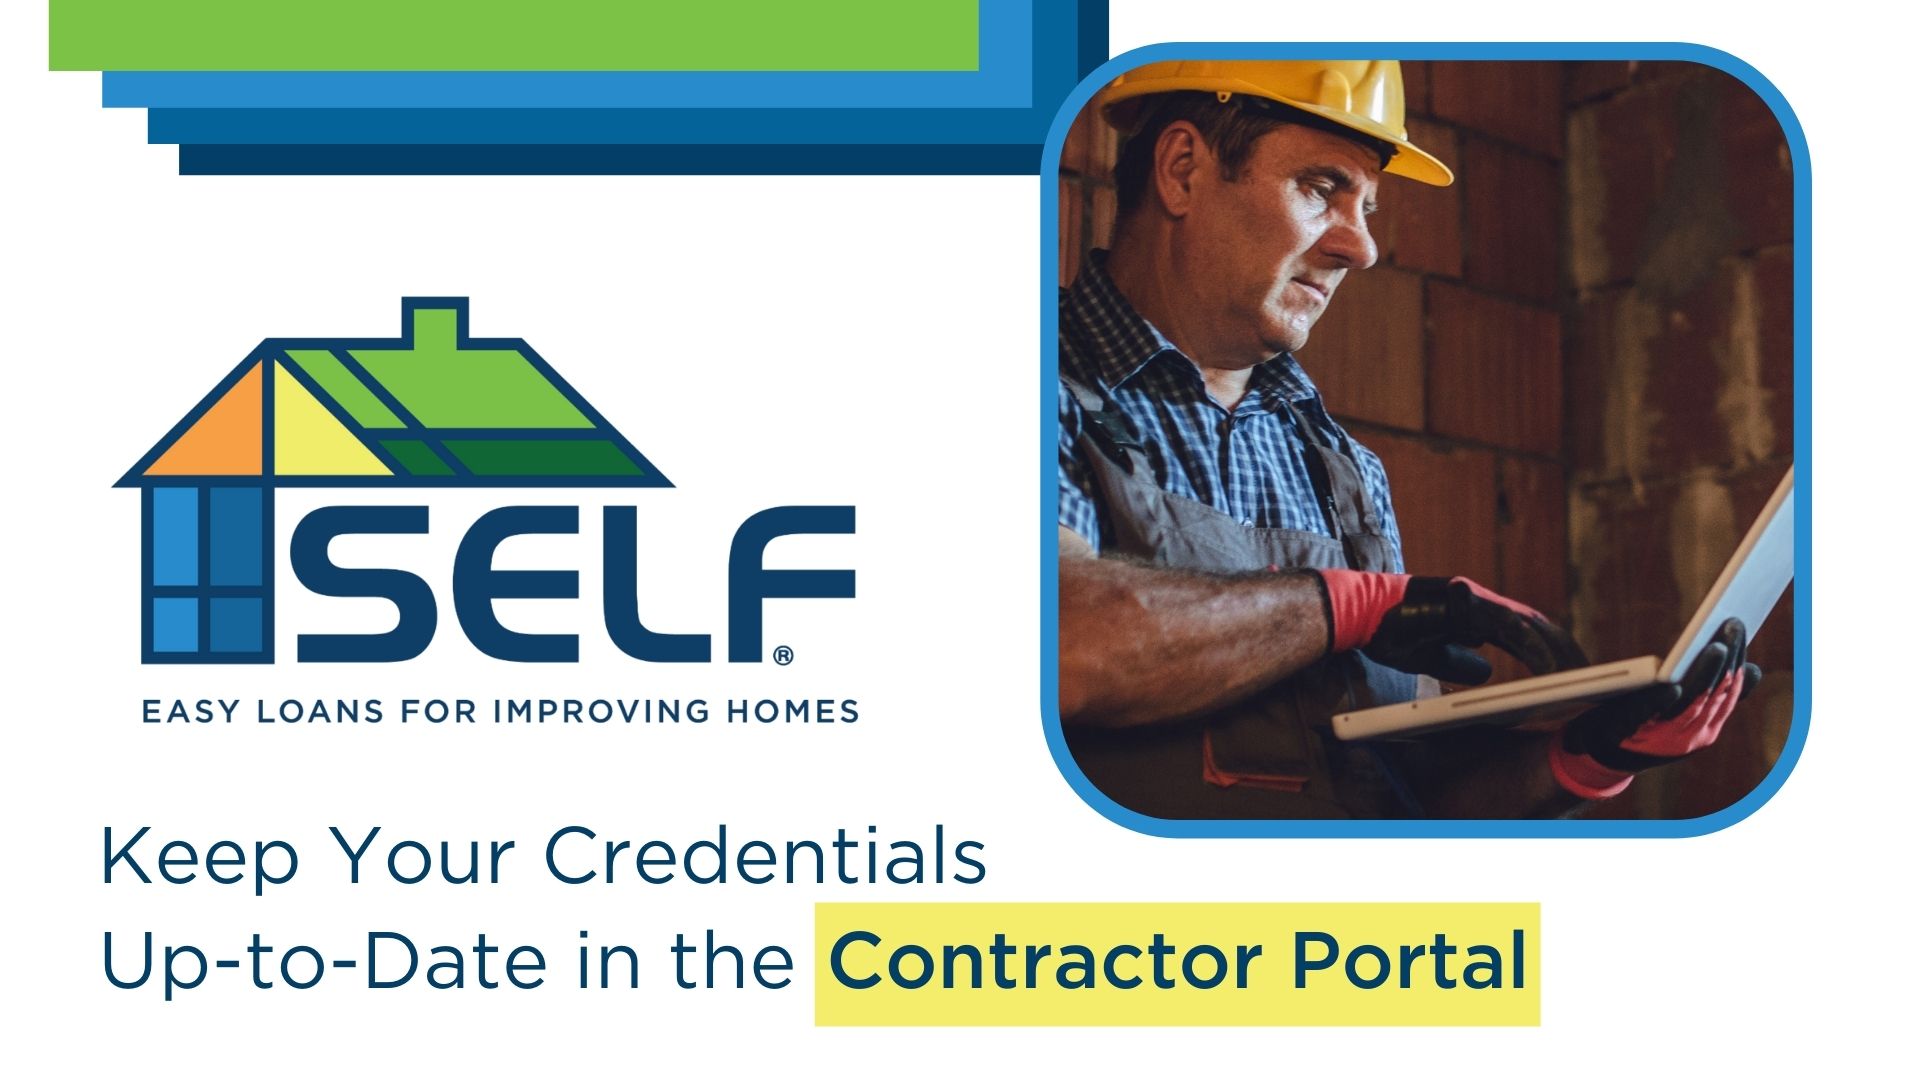 Keep Your Credentials Up-to-Date in the Contractor Portal